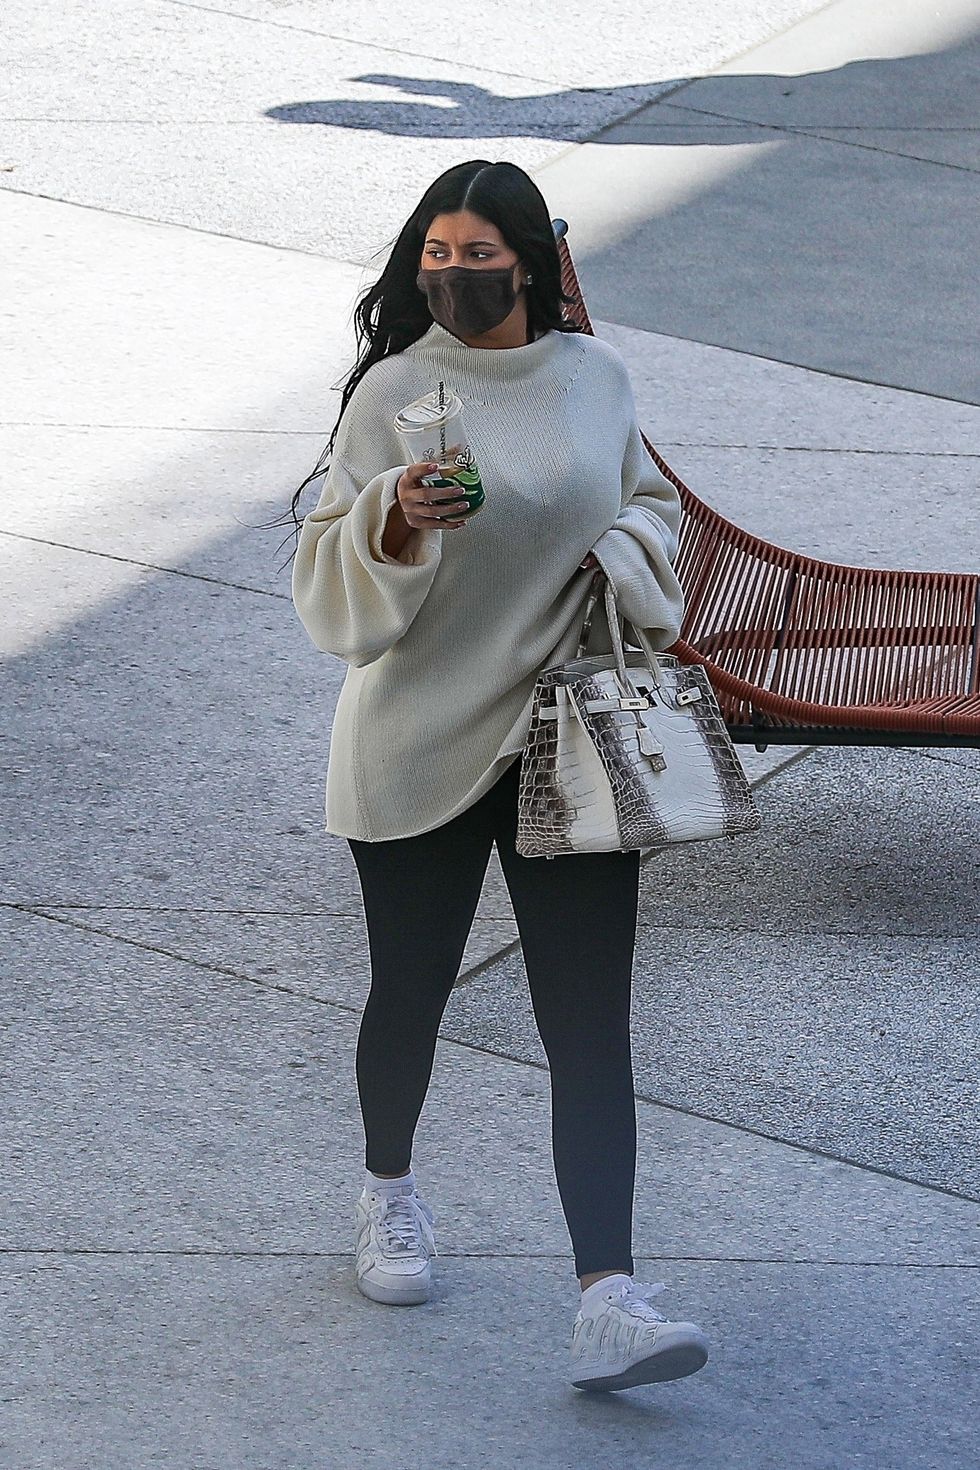 Photos from Kylie Jenner's Street Style